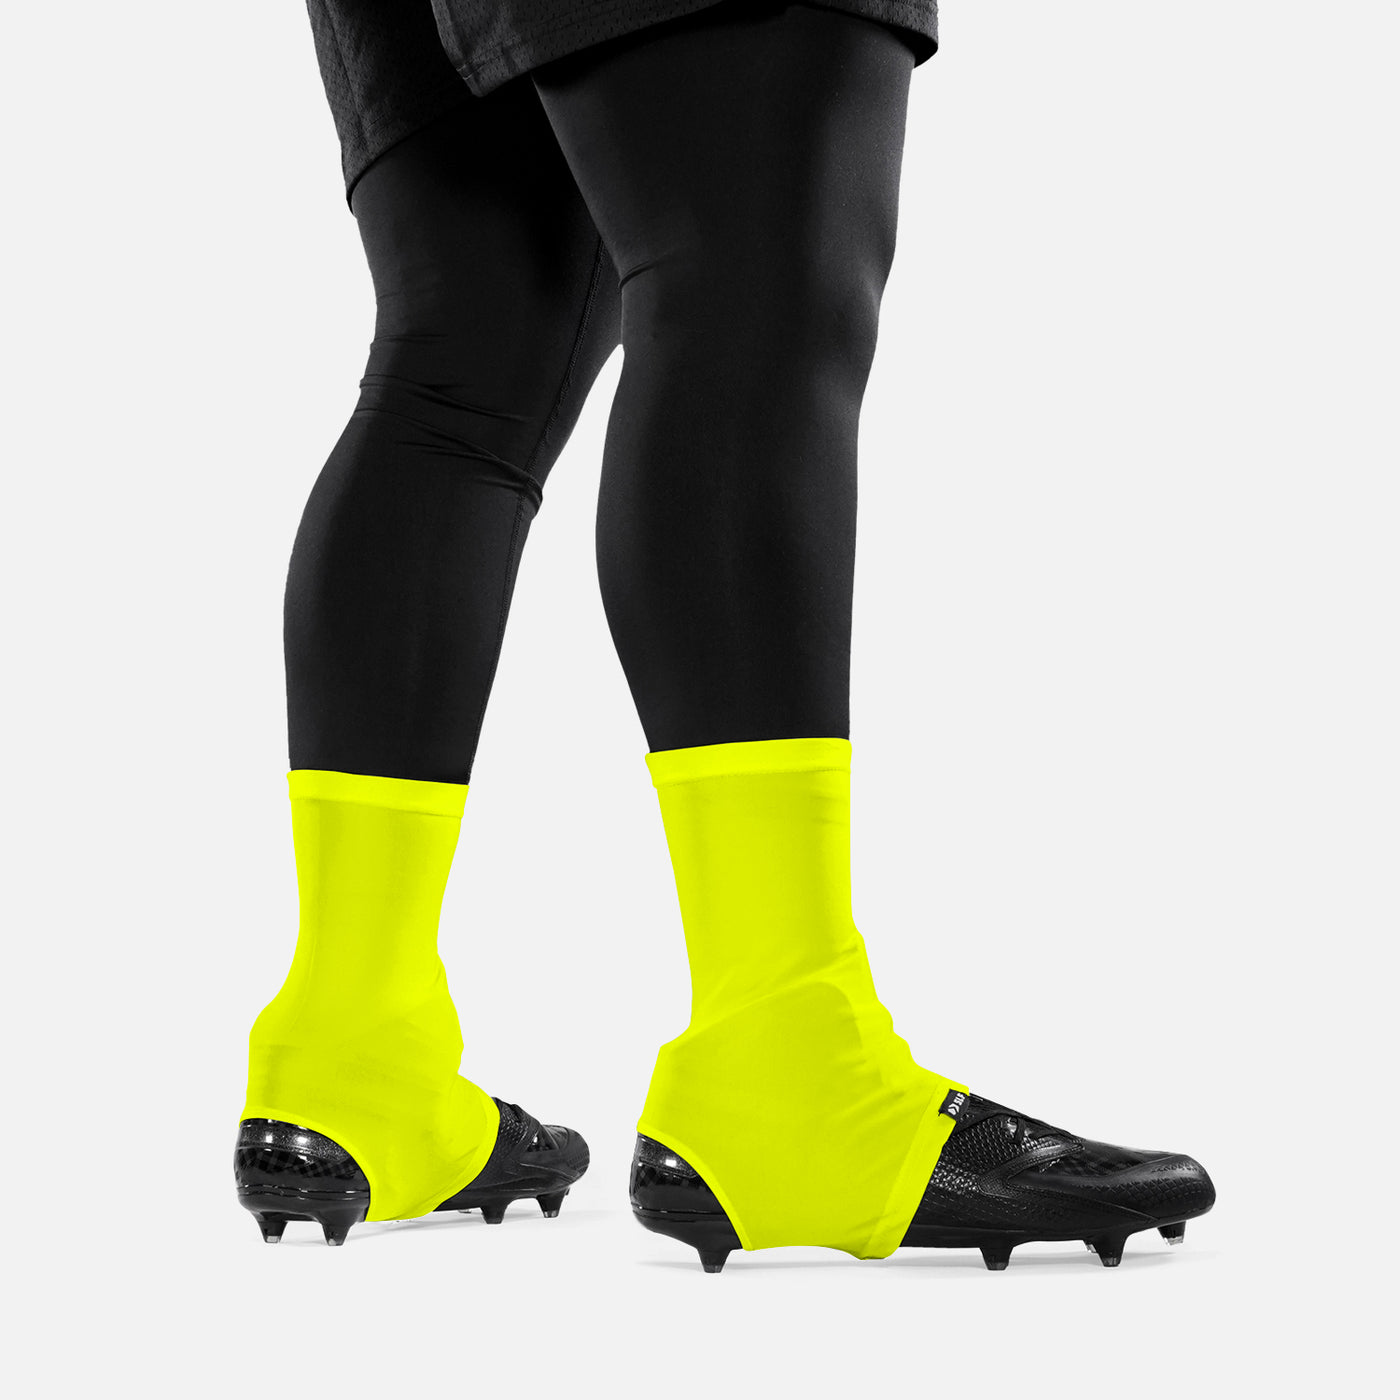 Safety Yellow Spats / Cleat Covers - Big